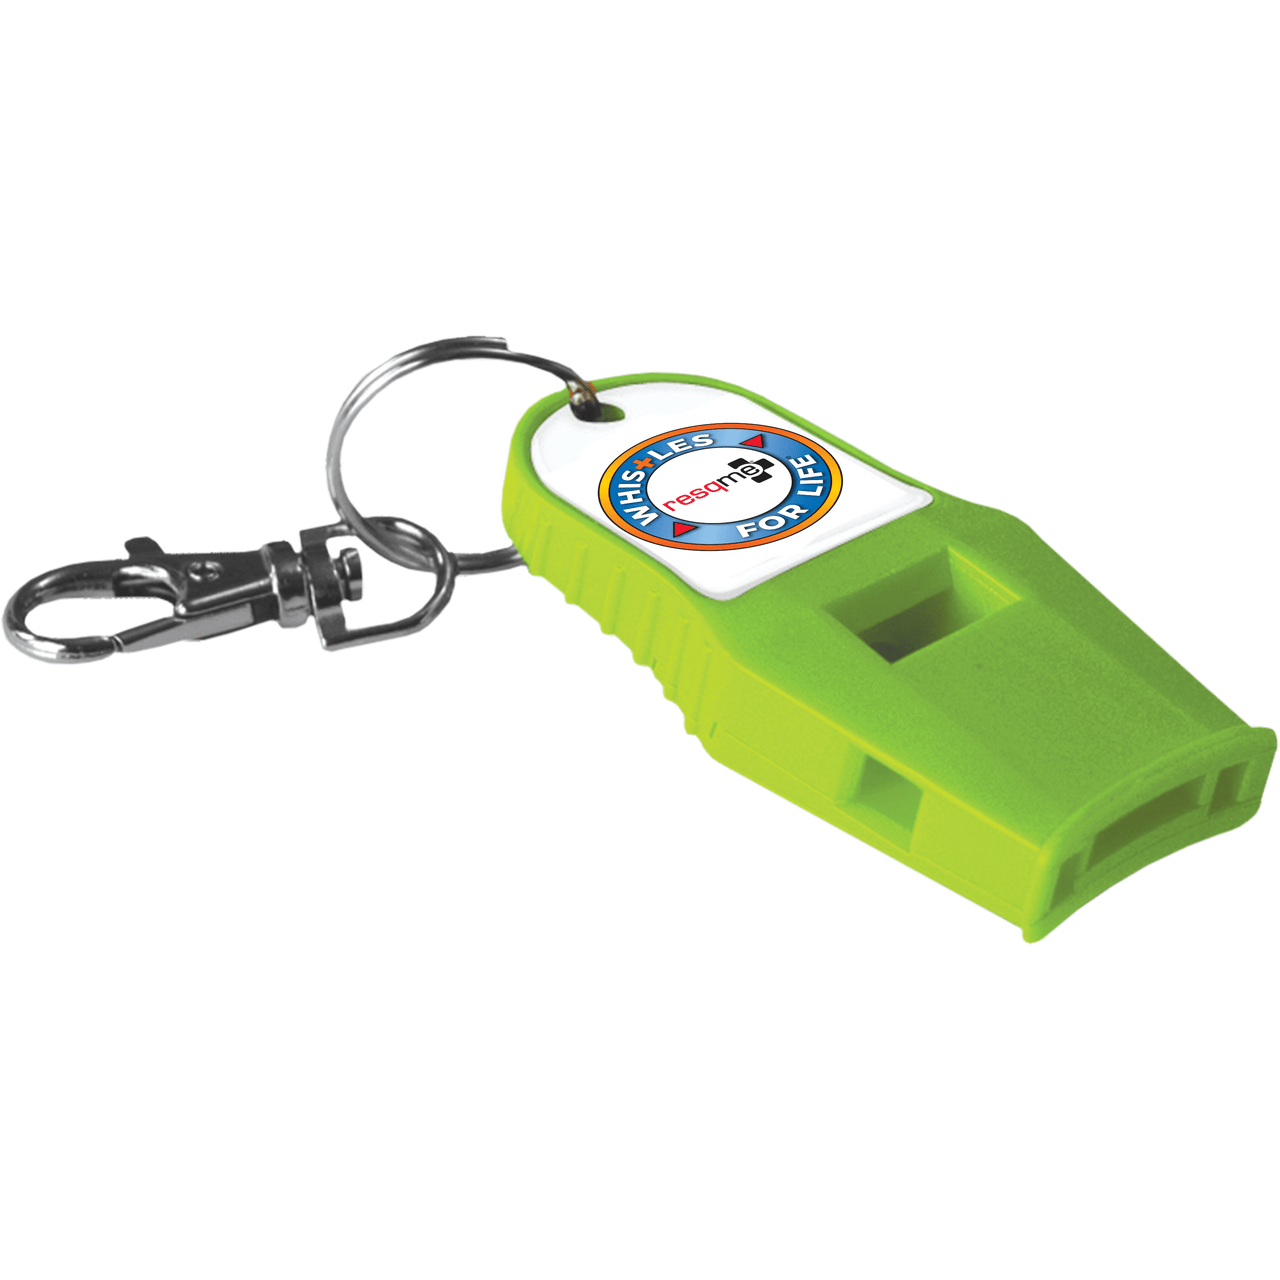 Paramedic Shop Resqme Inc Tools Green (Neon) Whistle for Life - Safety Whistle